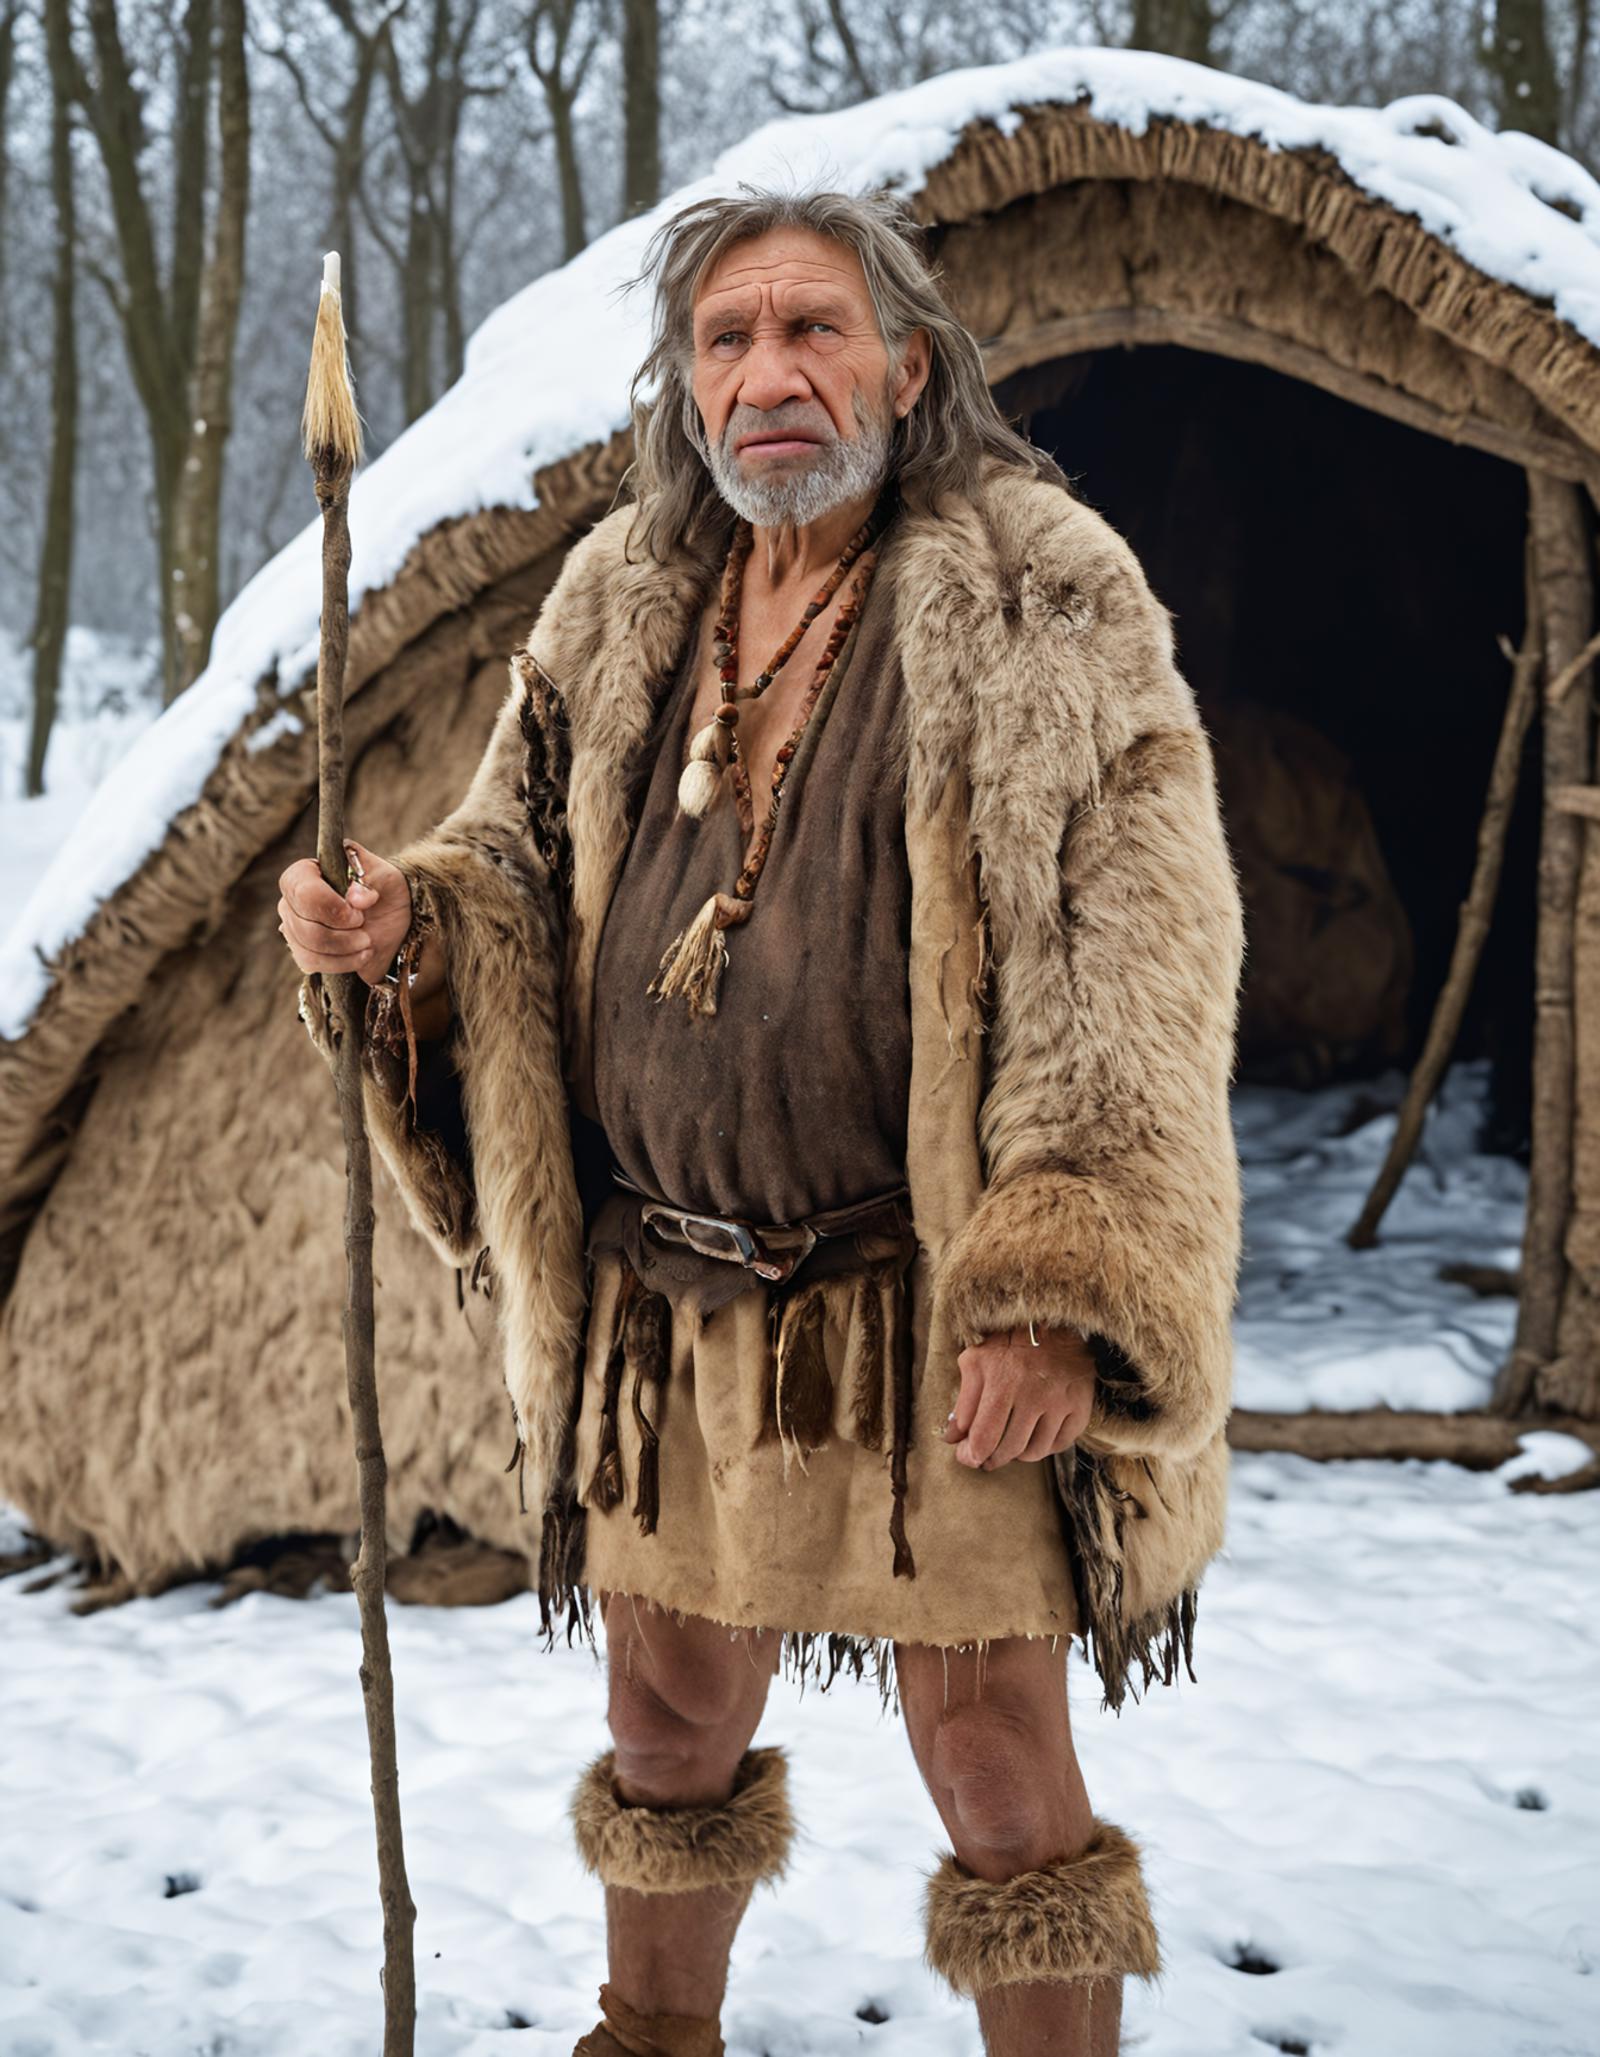 Neanderthal-concept image by Standspurfahrer